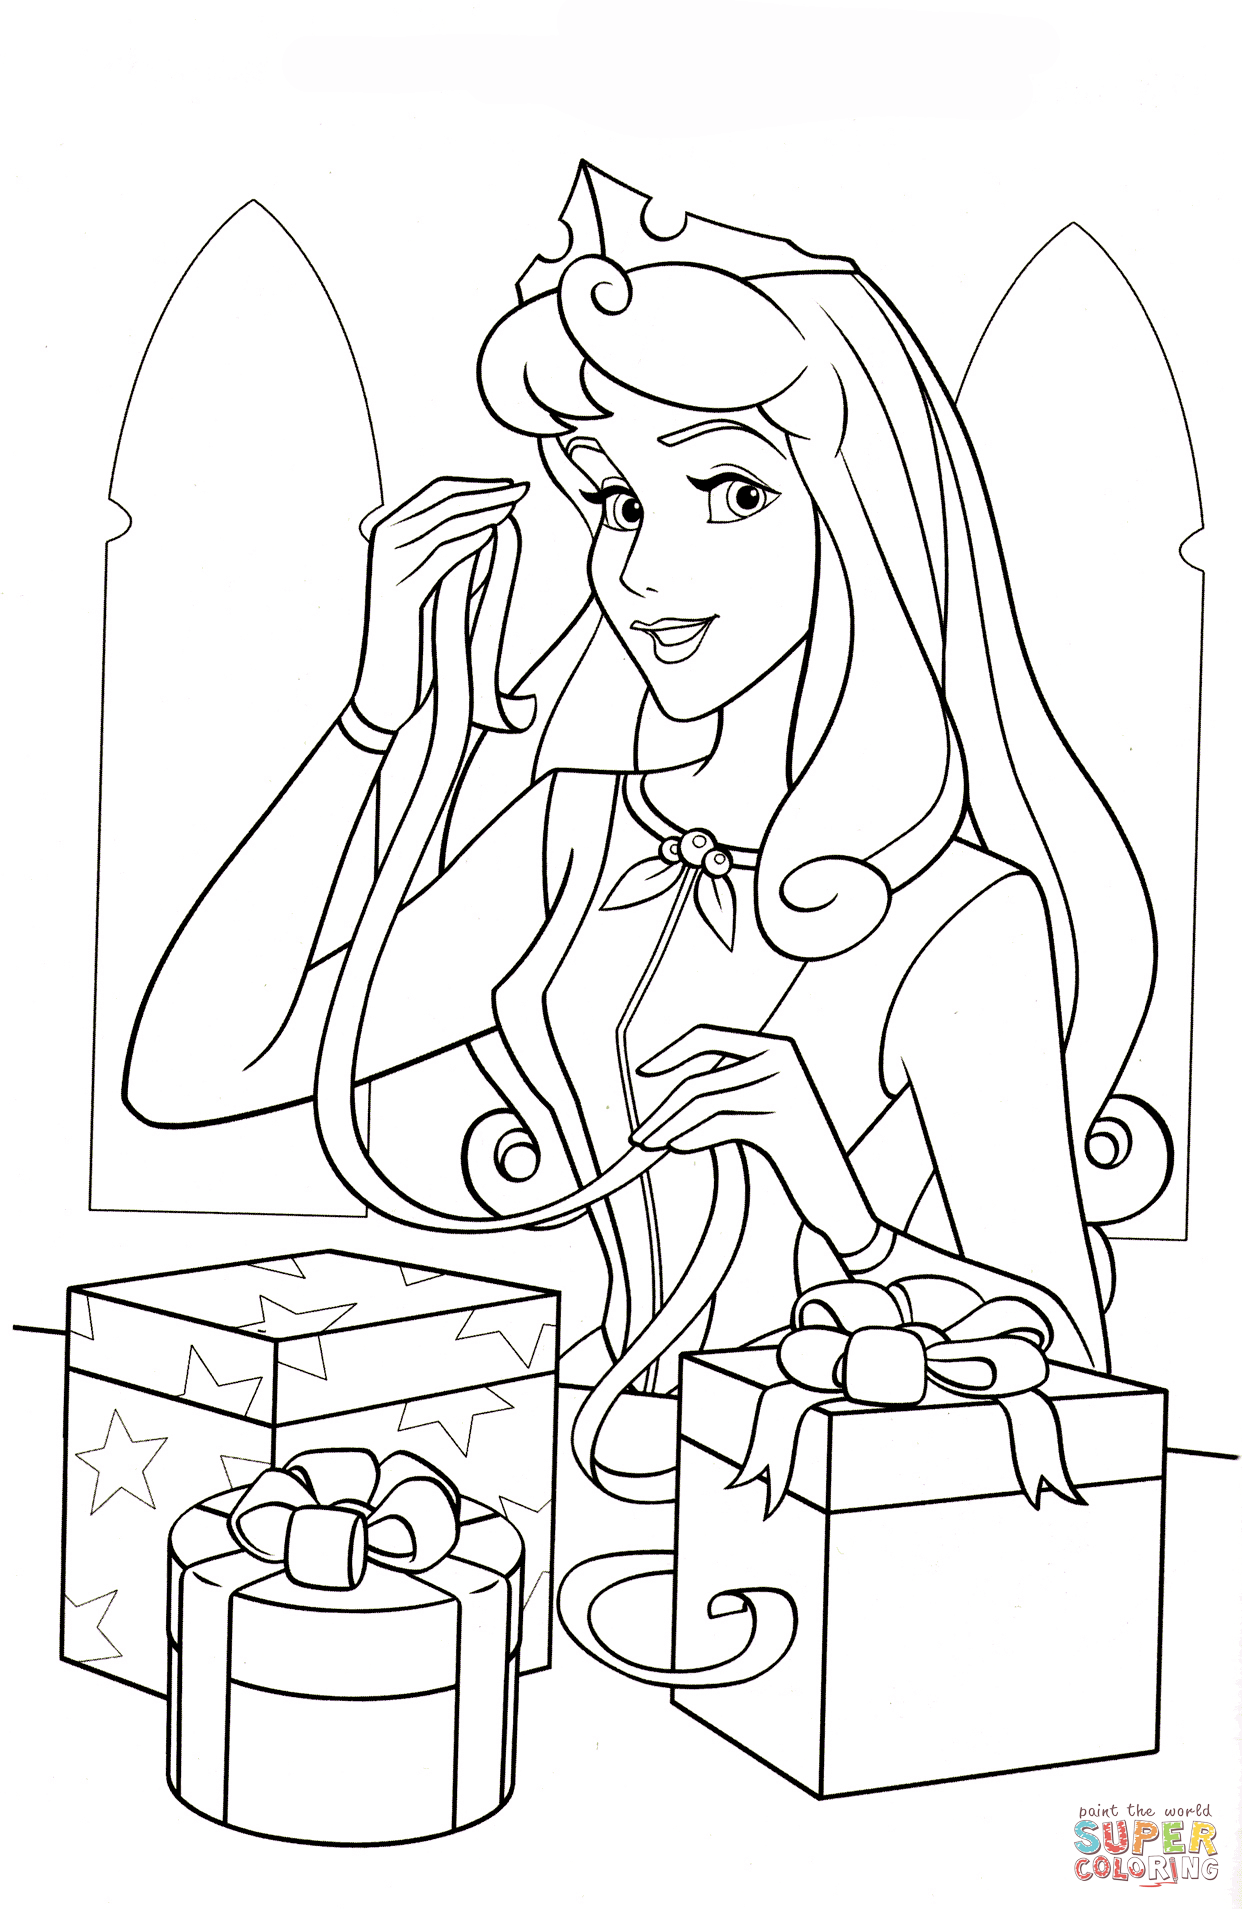 Princess aurora loves christmas coloring page free printable coloring pages